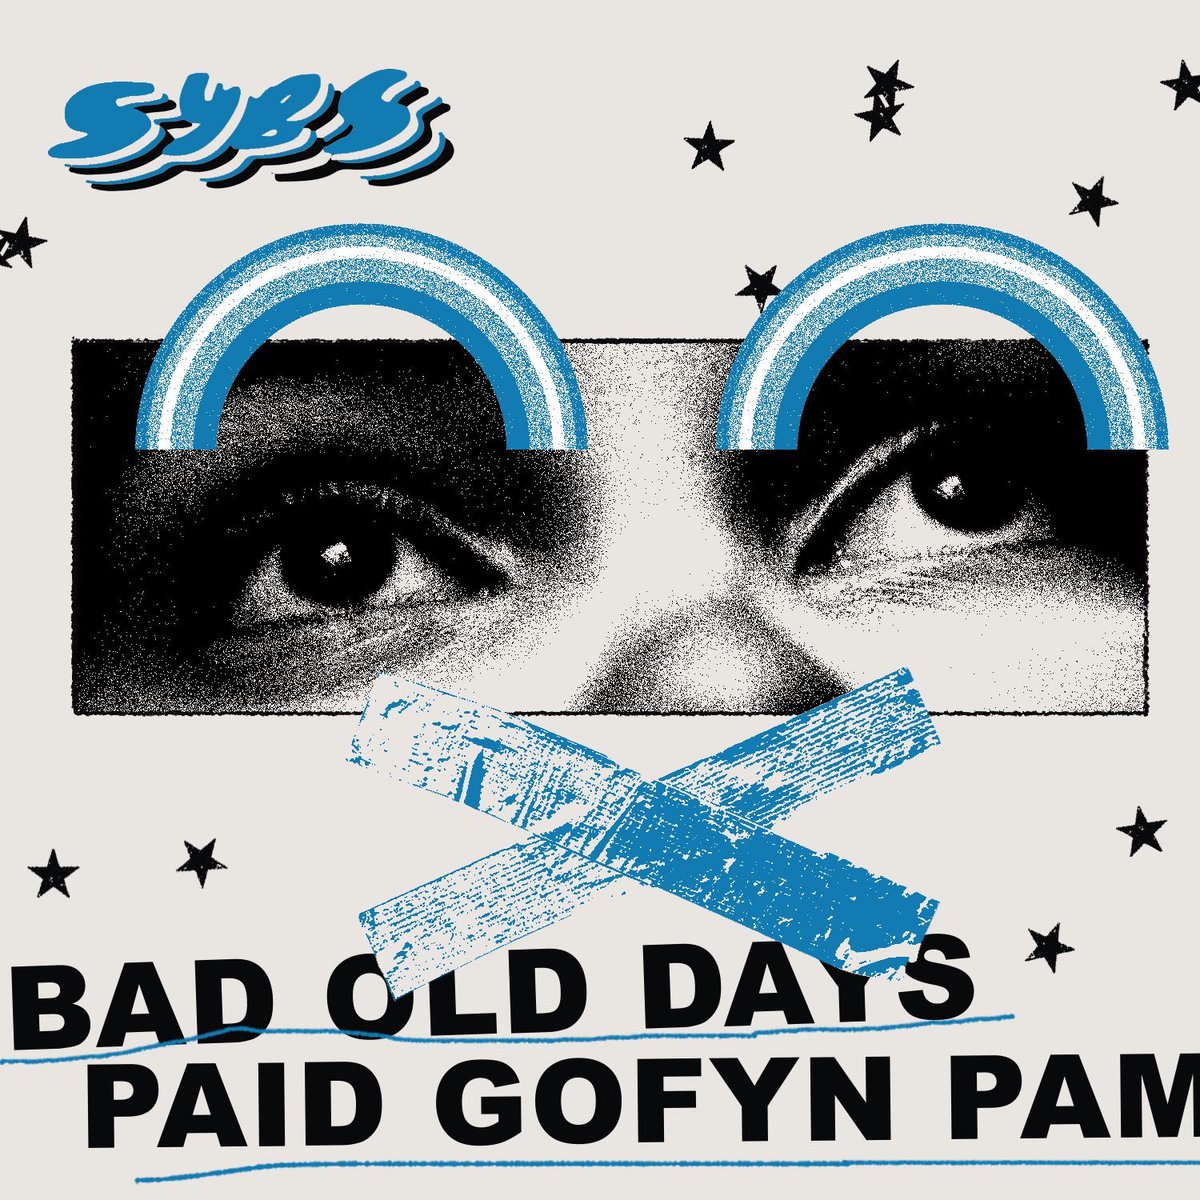 💎 ALLAN NAWR // OUT NOW, sengl Dwbl A @SYBSband ‘Bad Old Days // Paid Gofyn Pam’ ‘Bad Old Days’ and the re-recorded album version of ‘Paid Gofyn Pam’ are the last single by SYBS before the release of their debut album 😮 ALBUM NEWS TO COME SOON 🔜 ⏰ 🎧orcd.co/badolddays-pai…